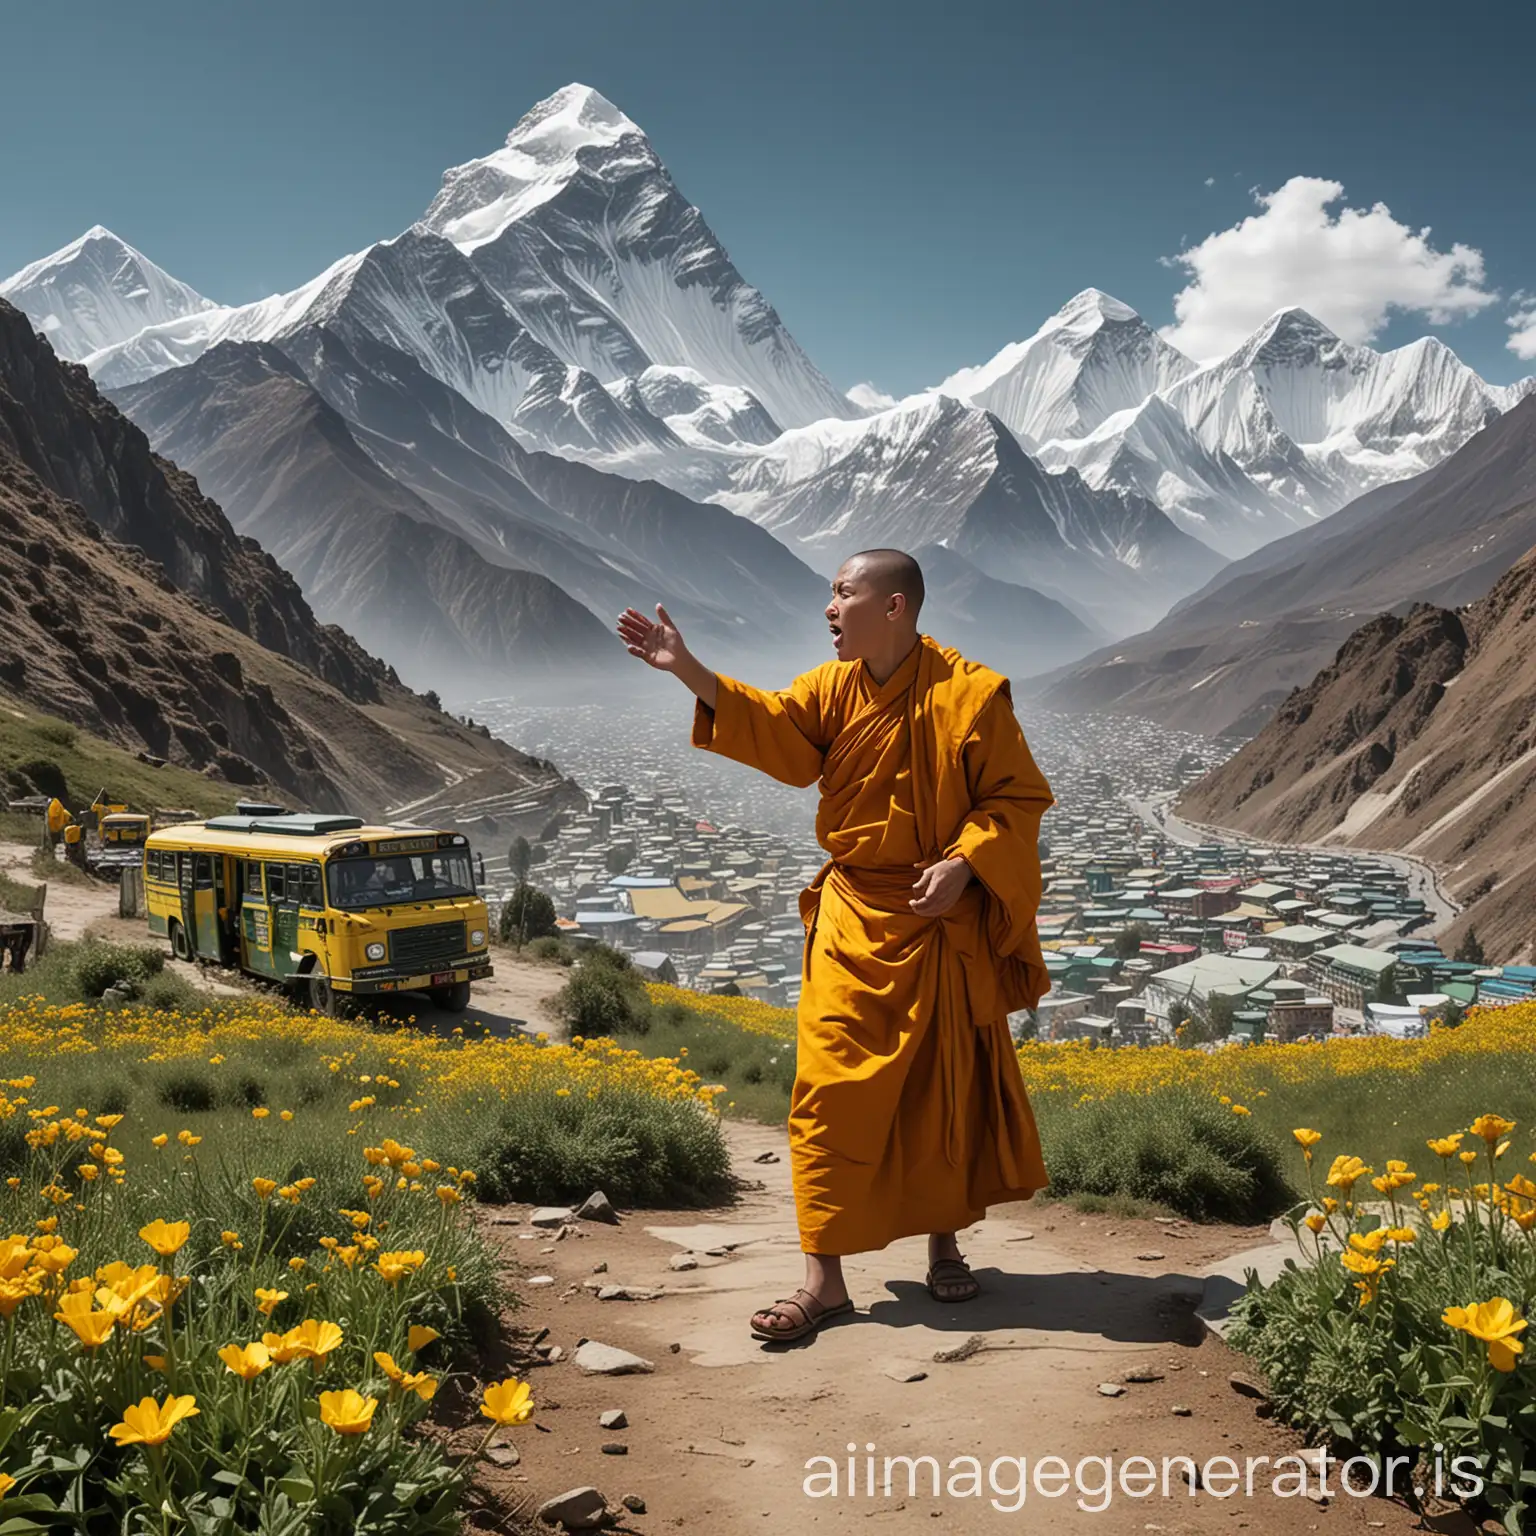 Create a picture of a monk boy arguing god of wisdom for he not able to understand the mantra of being knowledgeable. The background is on the top hill of the mountain marked by green buses with yellow and blue flowers glancing the majestic mount everest. The monk fried from behind stopping.